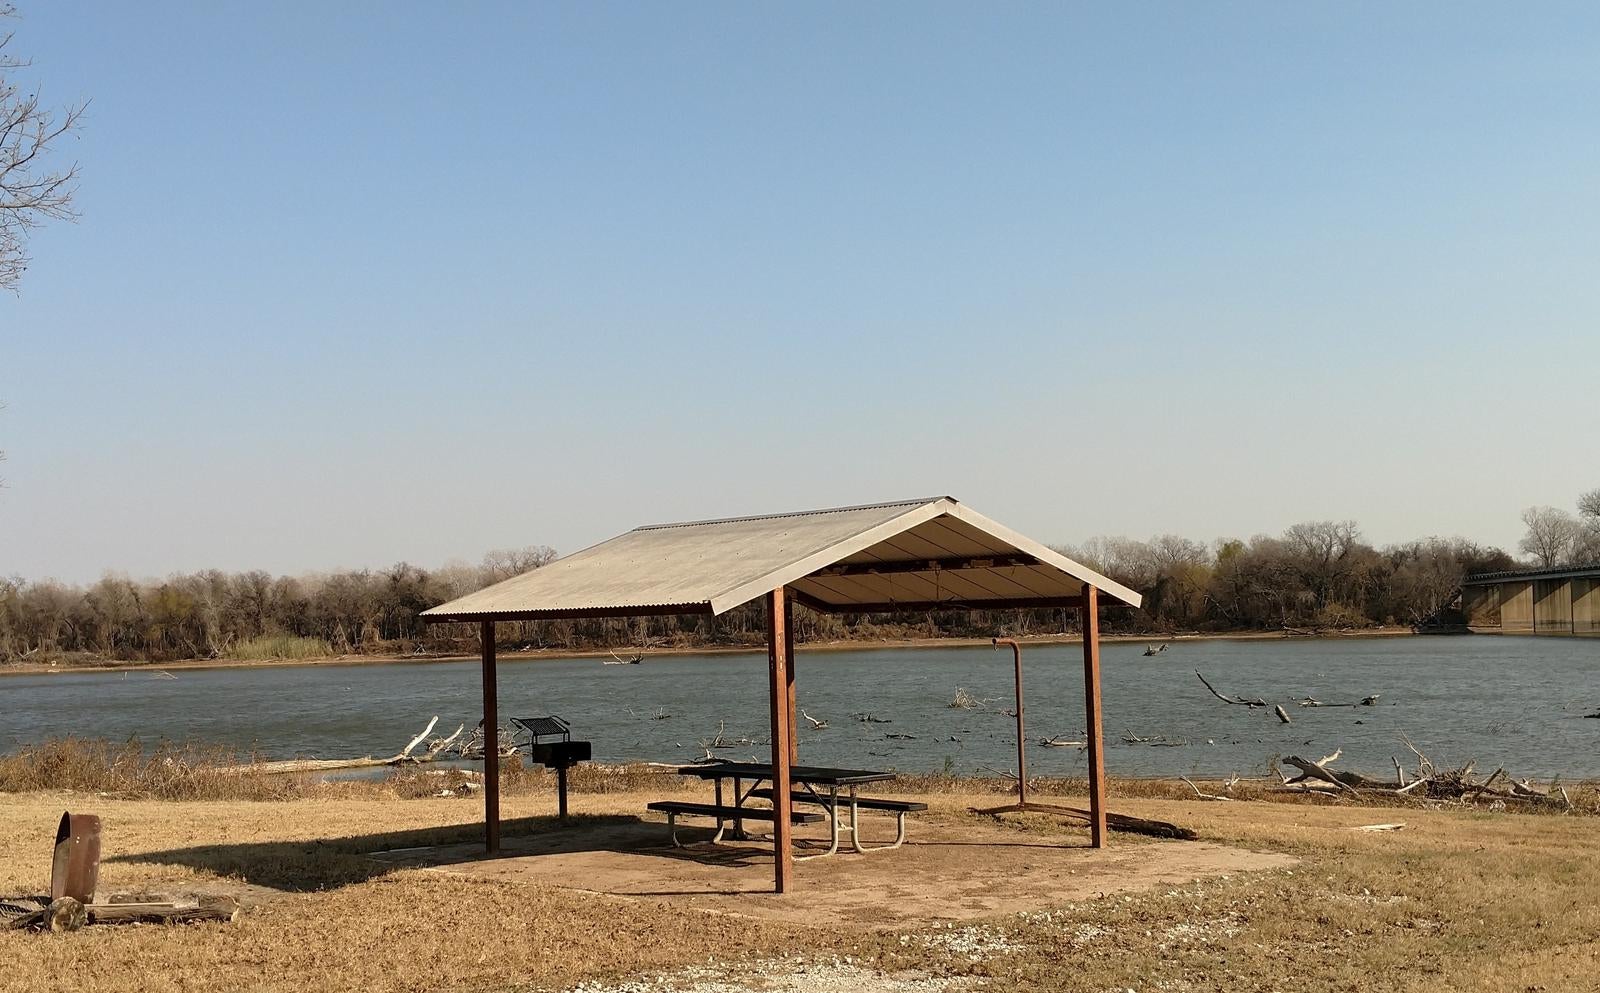 Camper submitted image from Kimball Bend Park - 4